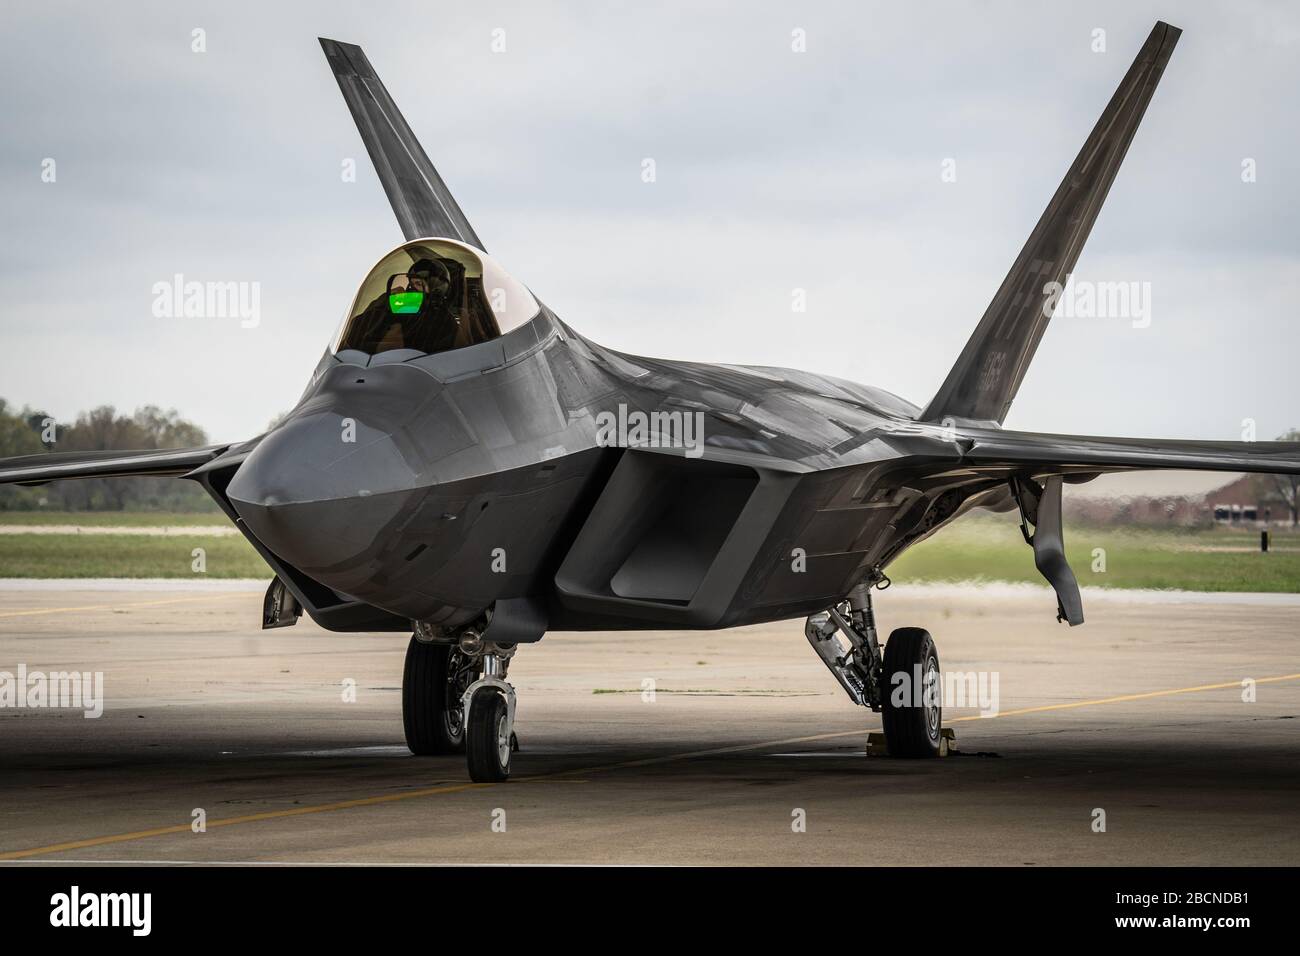 U.S. Air Force Maj. Josh Gunderson, F-22 Raptor Demonstration Team commander and pilot, taxis out before an aerial demonstration at Joint Base Langley-Eustis, Va., March 30, 2020. Maj. Gunderson has over 1,500 hours flying both the F-15 Eagle and F-22 Raptor and is in his first year as commander of the F-22 Raptor Demo Team. (U.S. Air Force photo by Lt. Sam Eckholm) Stock Photo